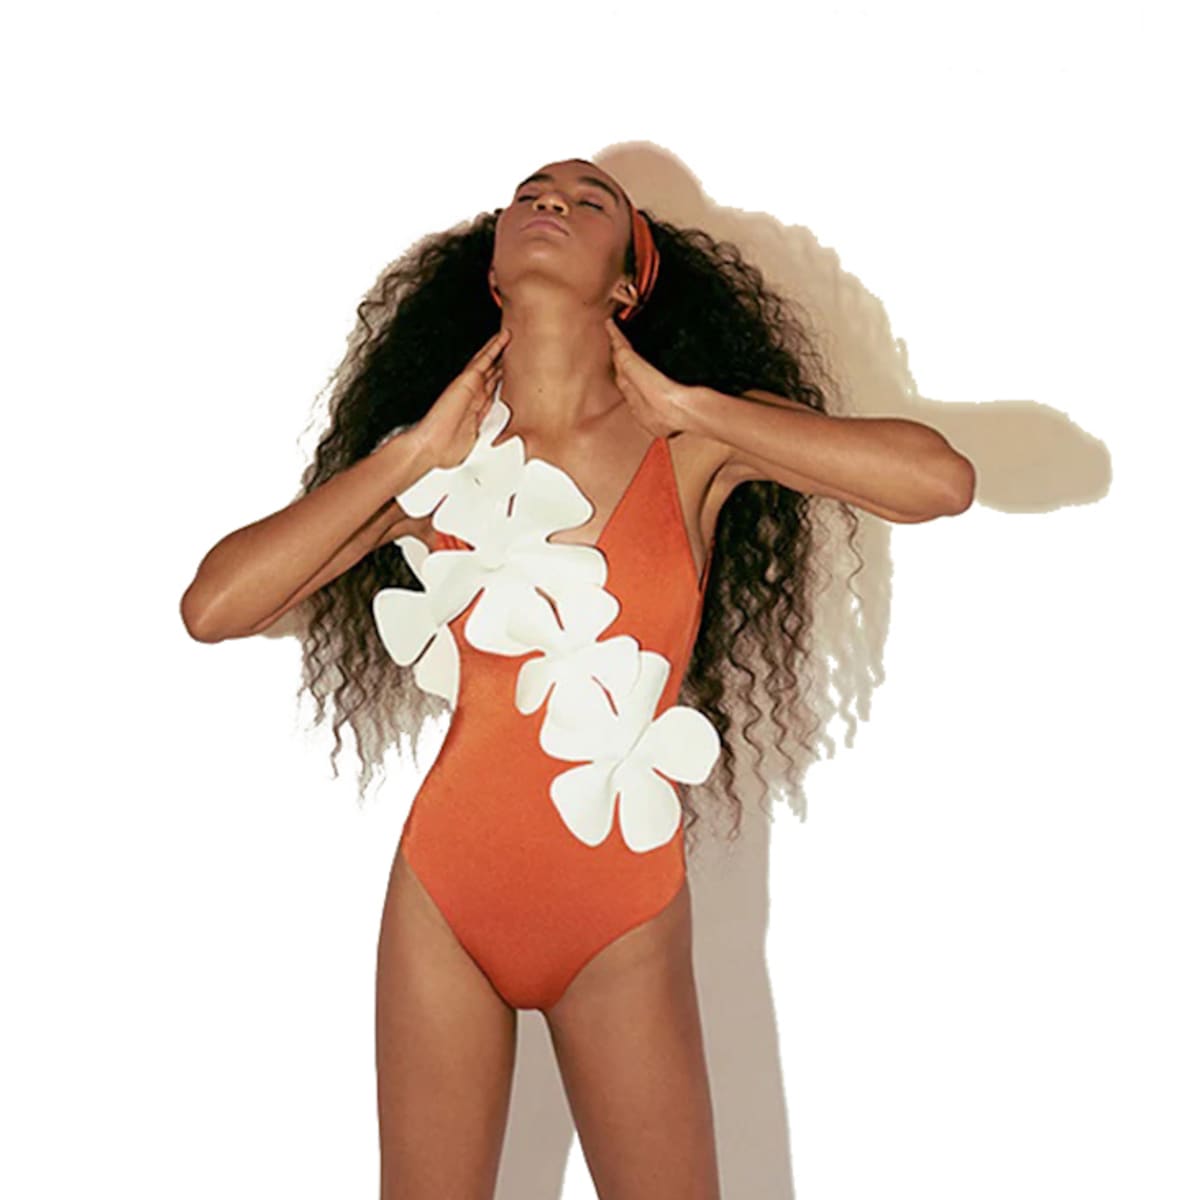 21 Latinx-Owned Swimwear Brands That Are Making Their Mark in the